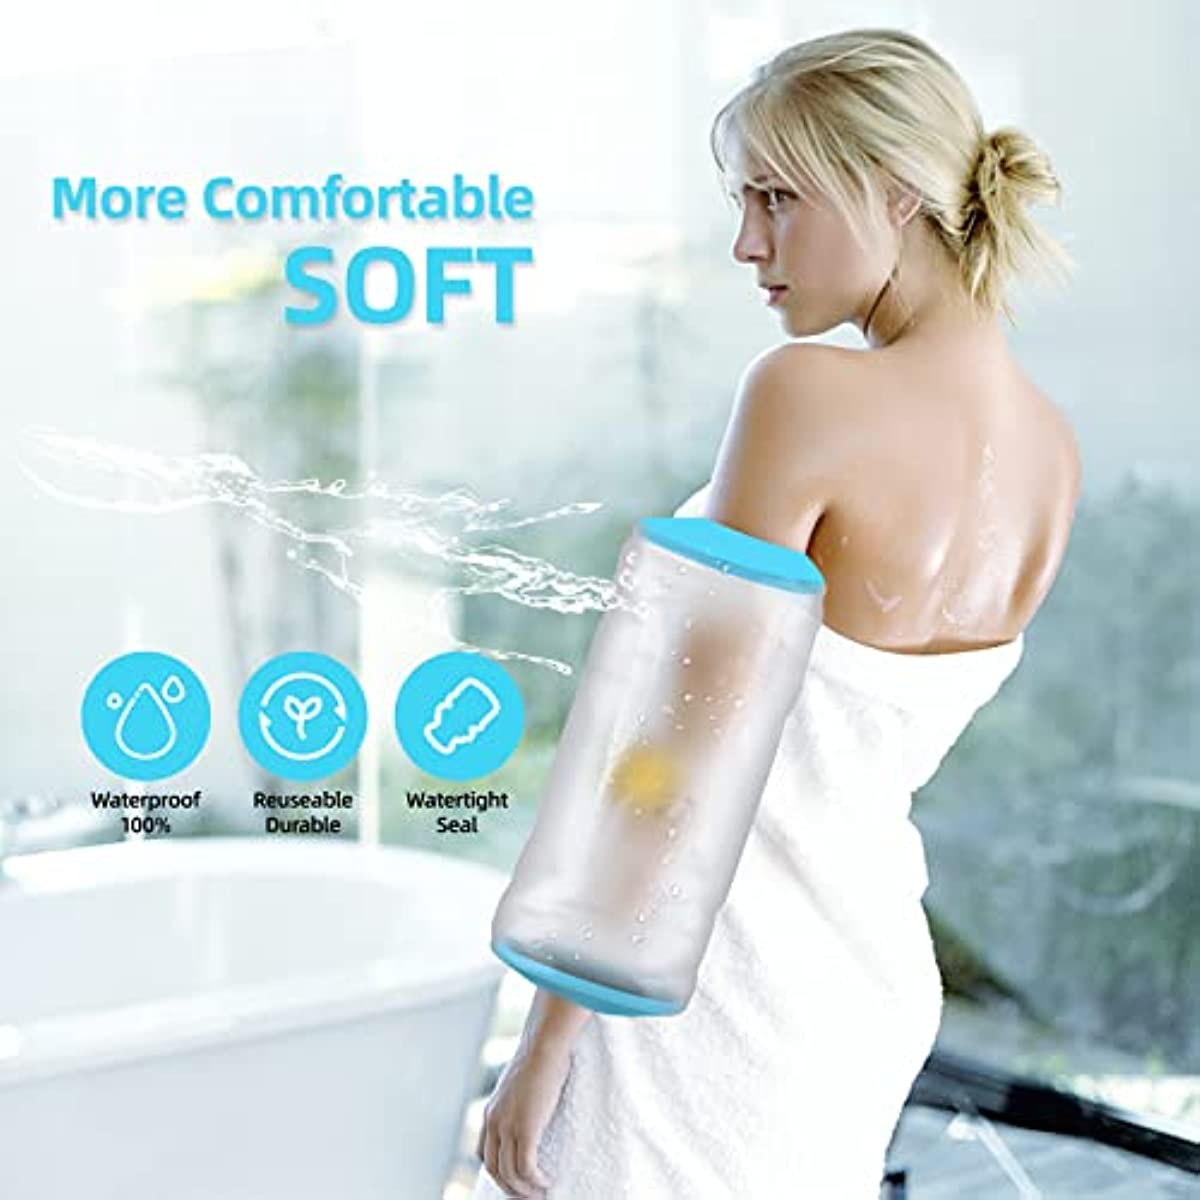 PICC Line Shower Cover, Waterproof PICC Line Sleeve Protetcor for Chemotherapy Treatment, Broken Wound Elbow Reusable picc line Covers for Upper Arm Sleeve Protector for Bath Shower(Size:M)